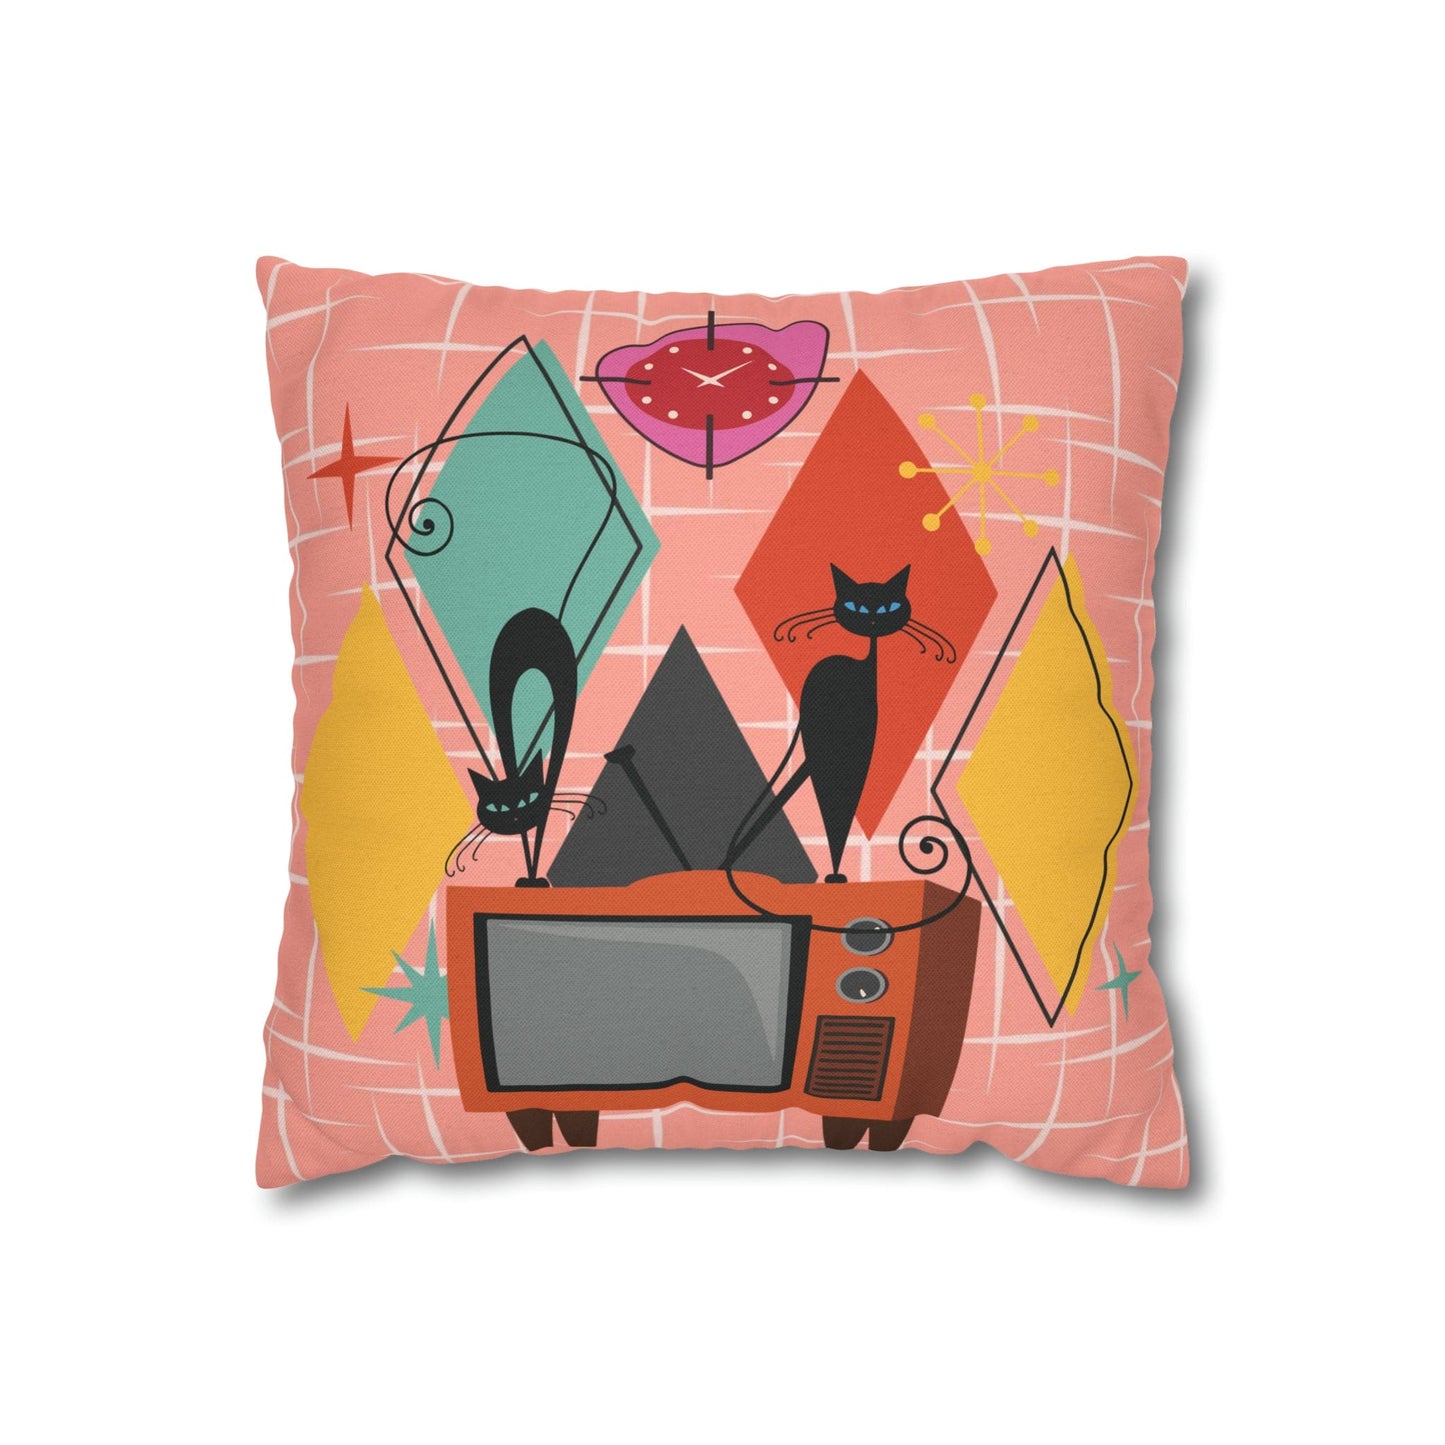 Kate McEnroe New York Atomic Cat Retro TV Pillow Cover, Mid Century Modern Orange, Teal, Yellow, Pink Cushion Covers, MCM Pillow Case Throw Pillow Covers 14" × 14" 42515276049672648852